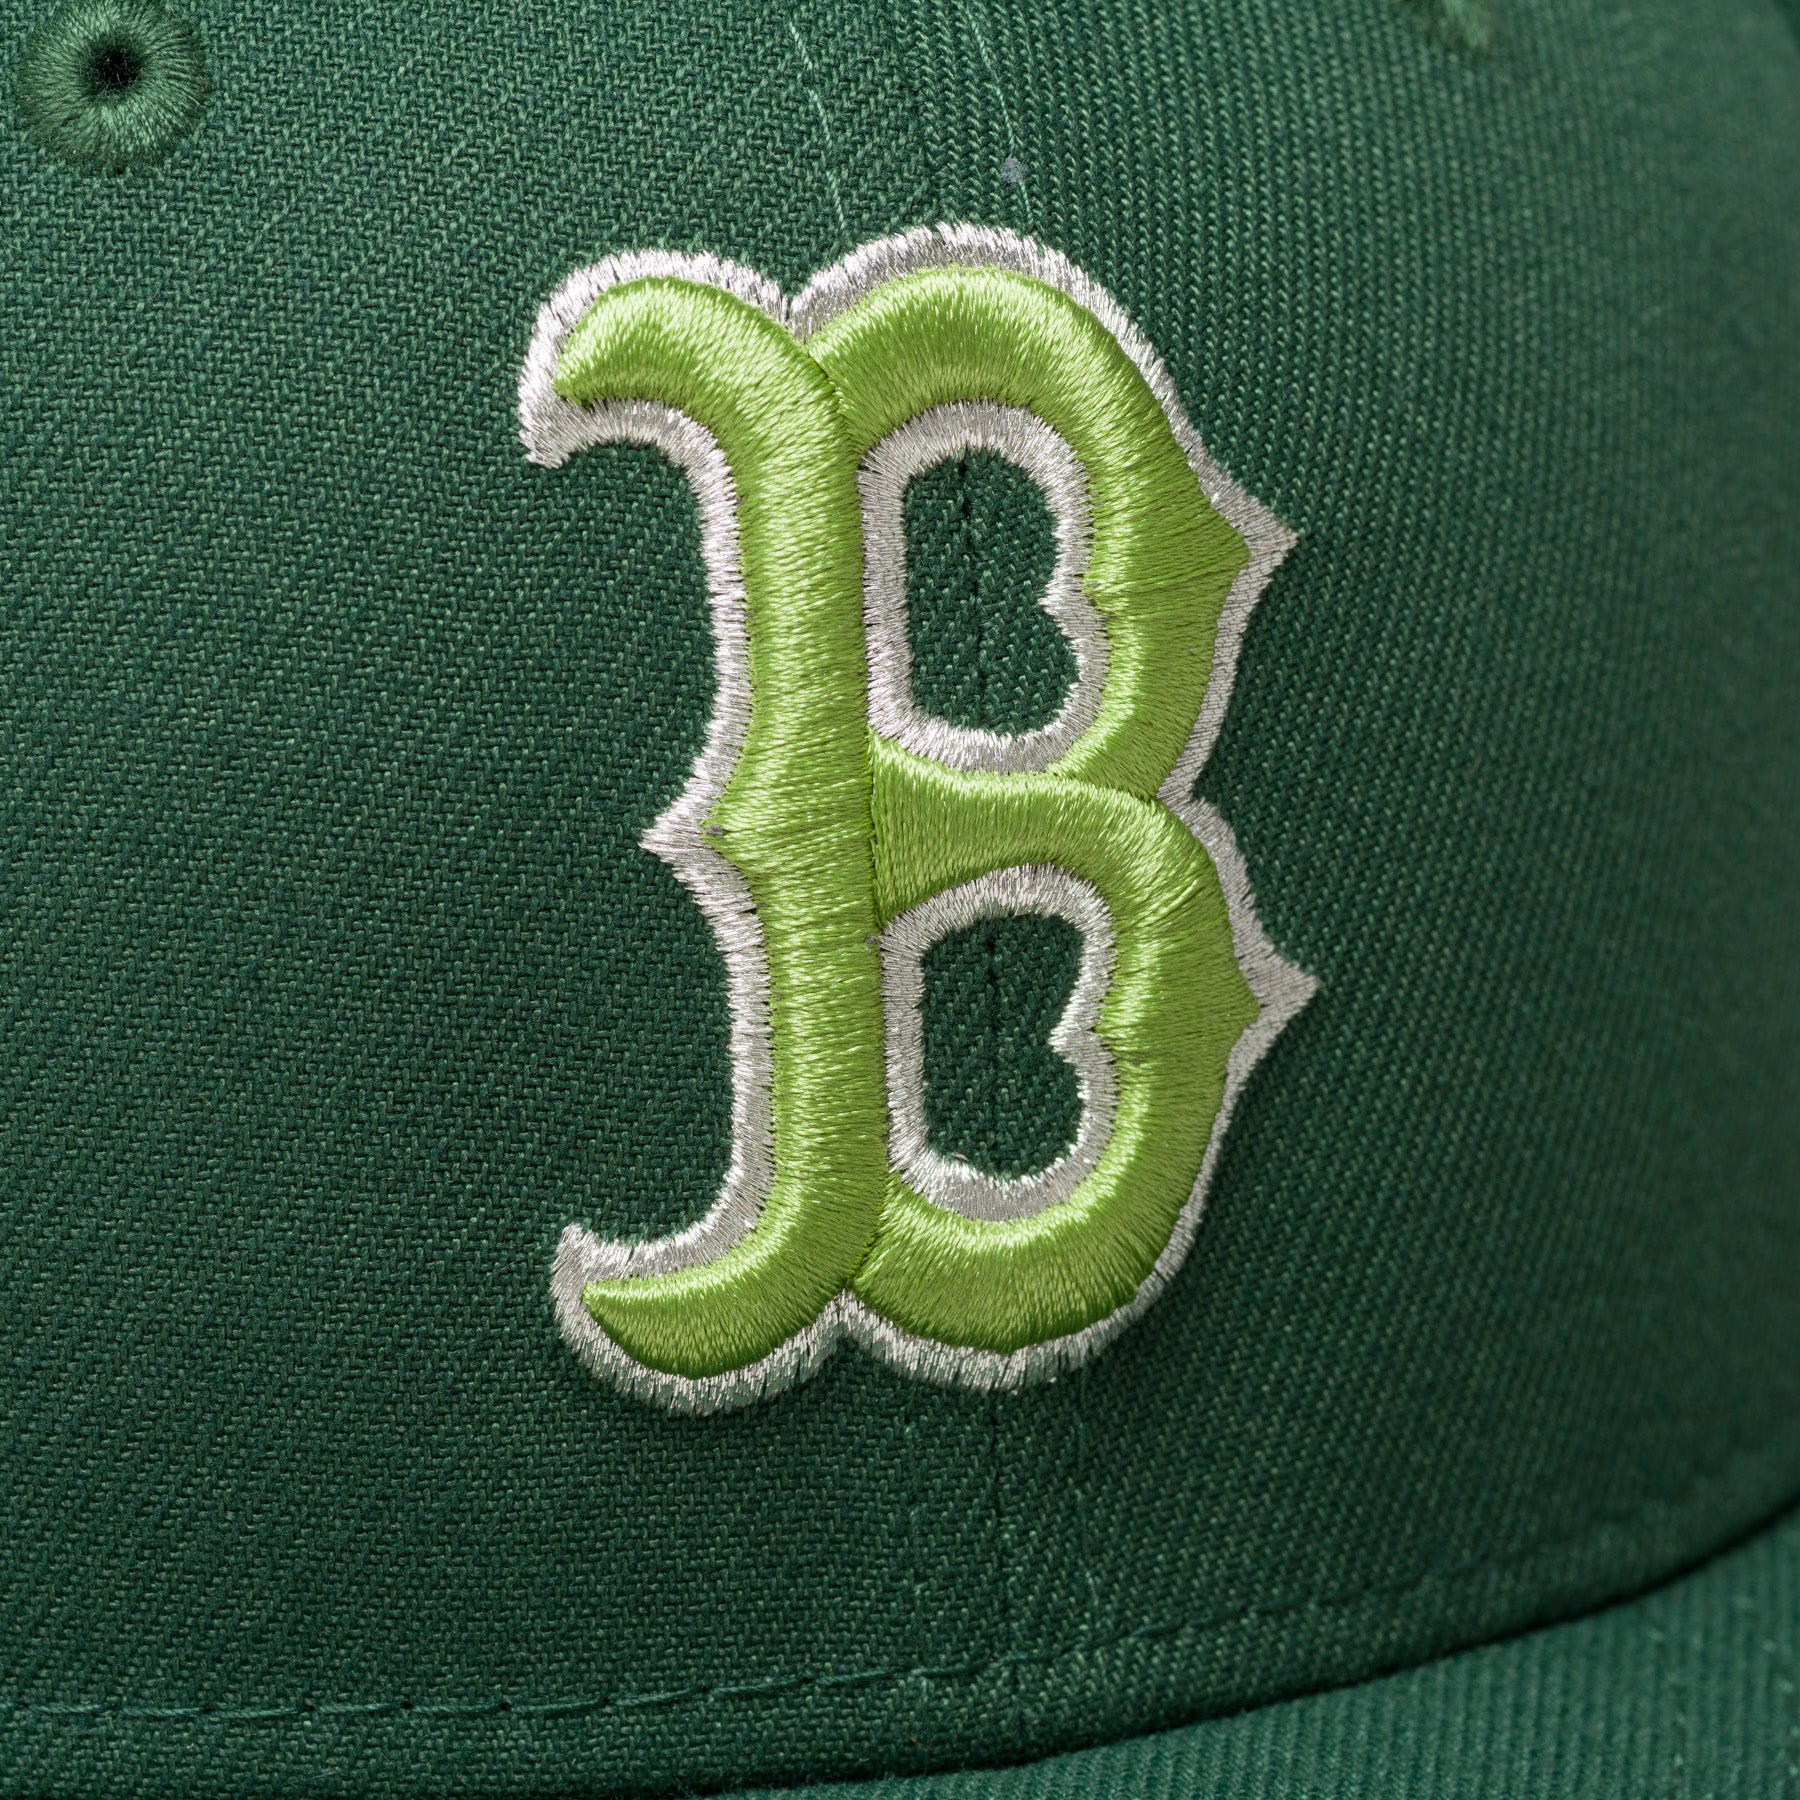 Concepts x New Era 59FIFTY Boston Red Sox Fitted Hat (Camel/Lime Green) 7 3/8